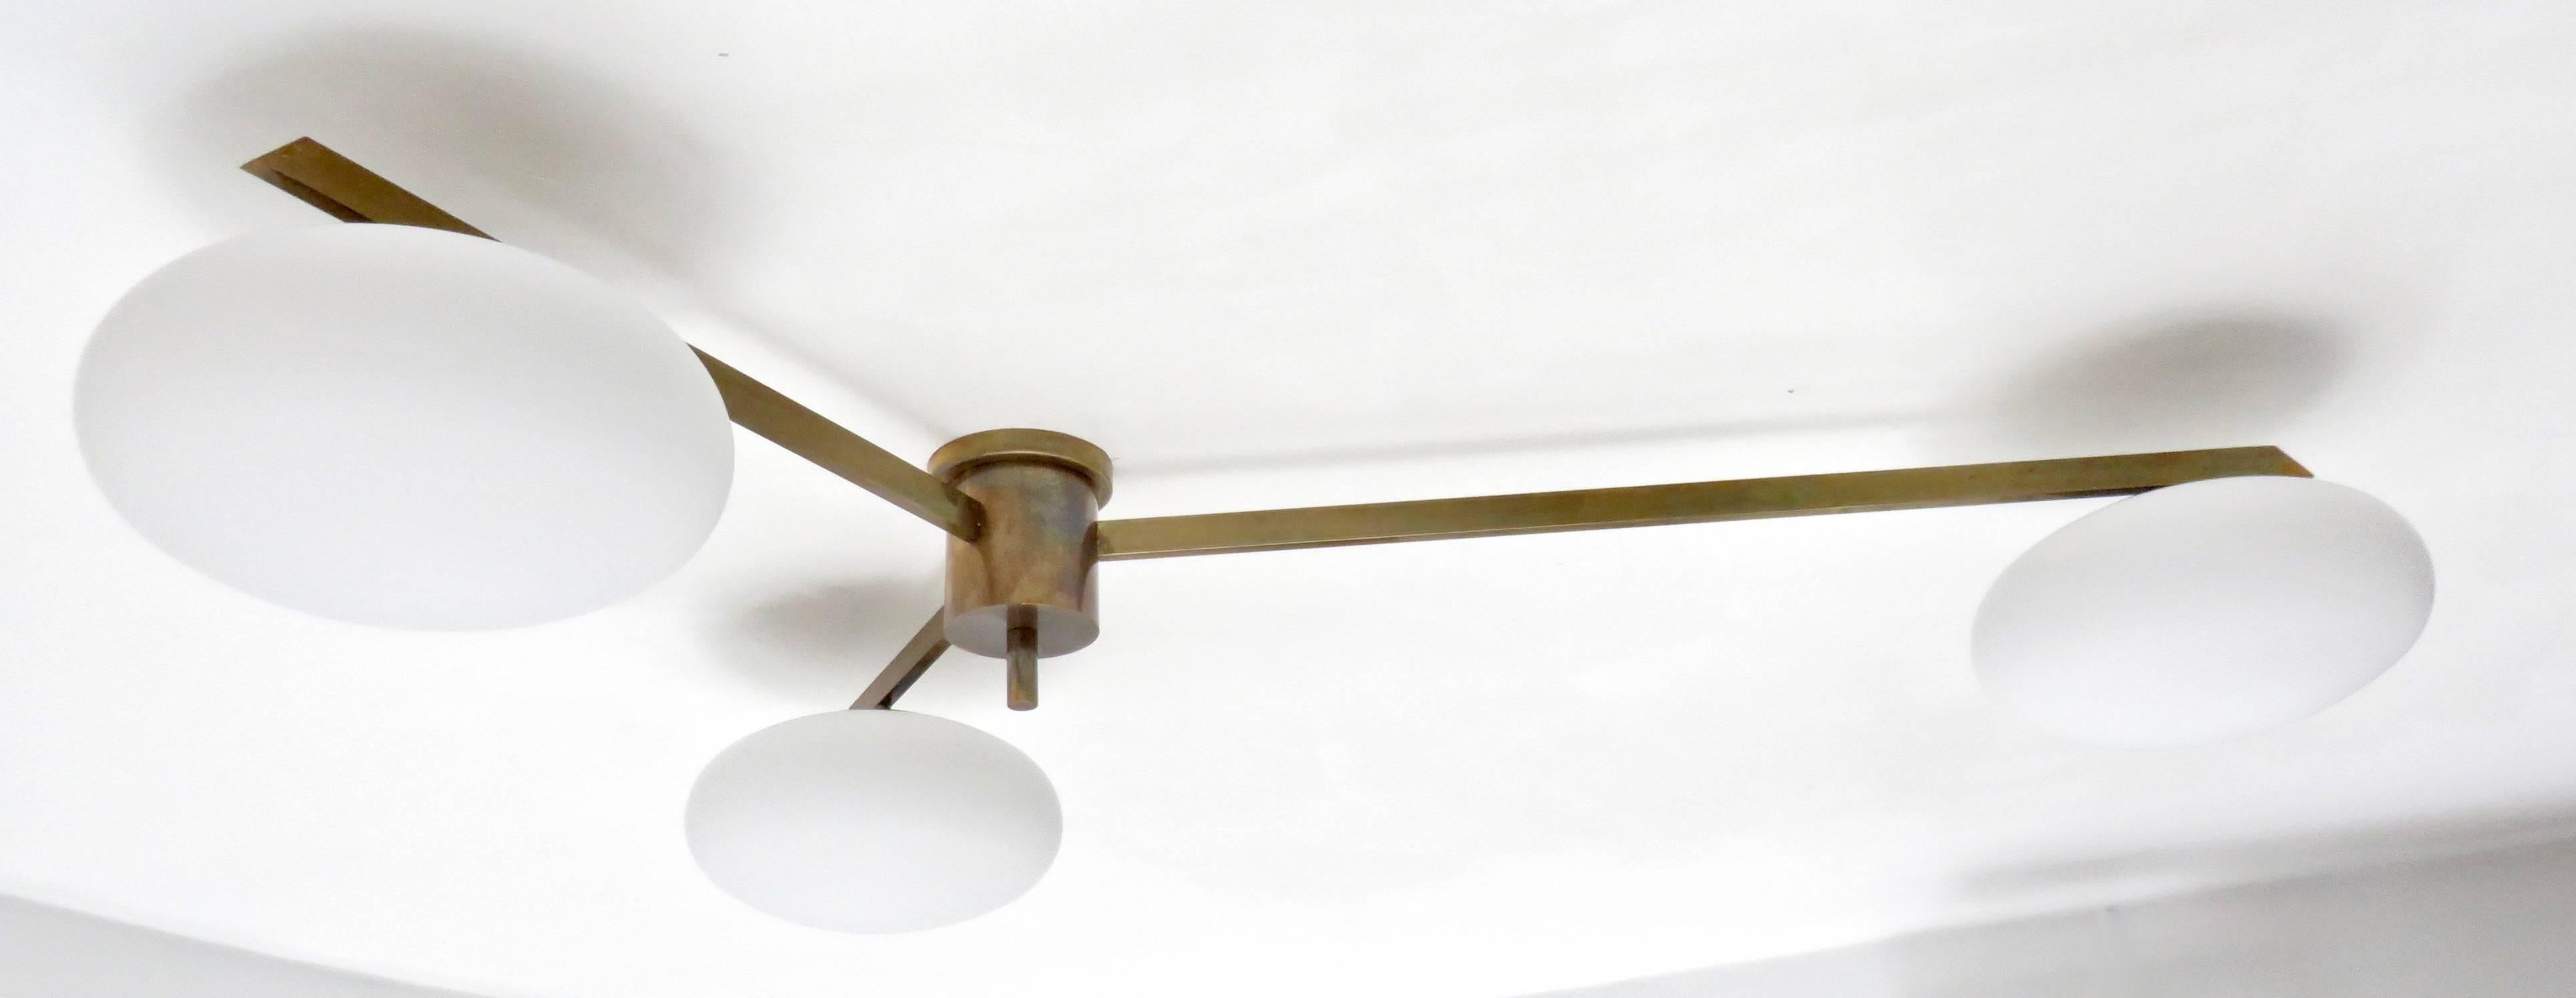 Three-arm ceiling or wall light sconce in the style of Angelo Lelli  for Arredoluce.
Original patina of brass structure with opaque glass shades.
Shown in detail shot with original sockets.
Signed with makes's mark on finial.
Overall measurement: